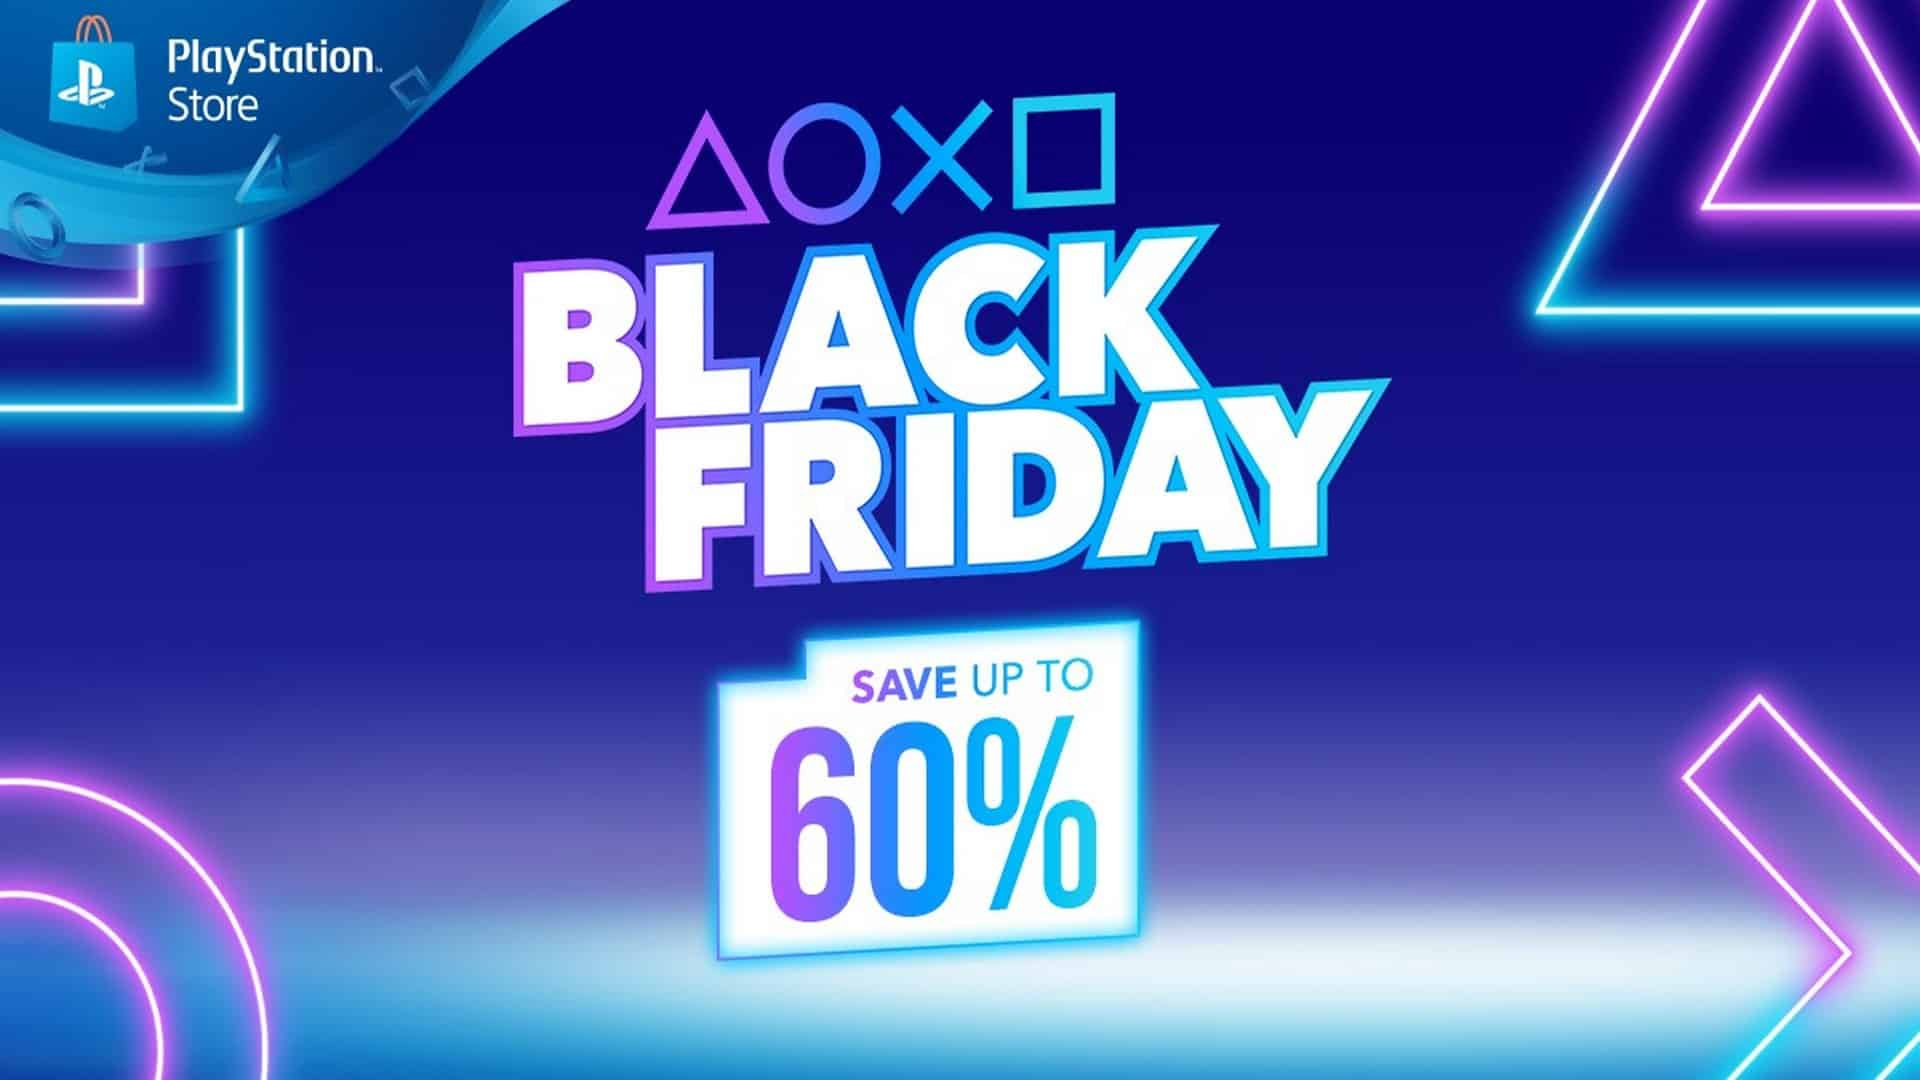 Hey Look, a Black Friday Advert Has Appeared on the PS4's Dashboard - Does Quadratec Have Black Friday Deals